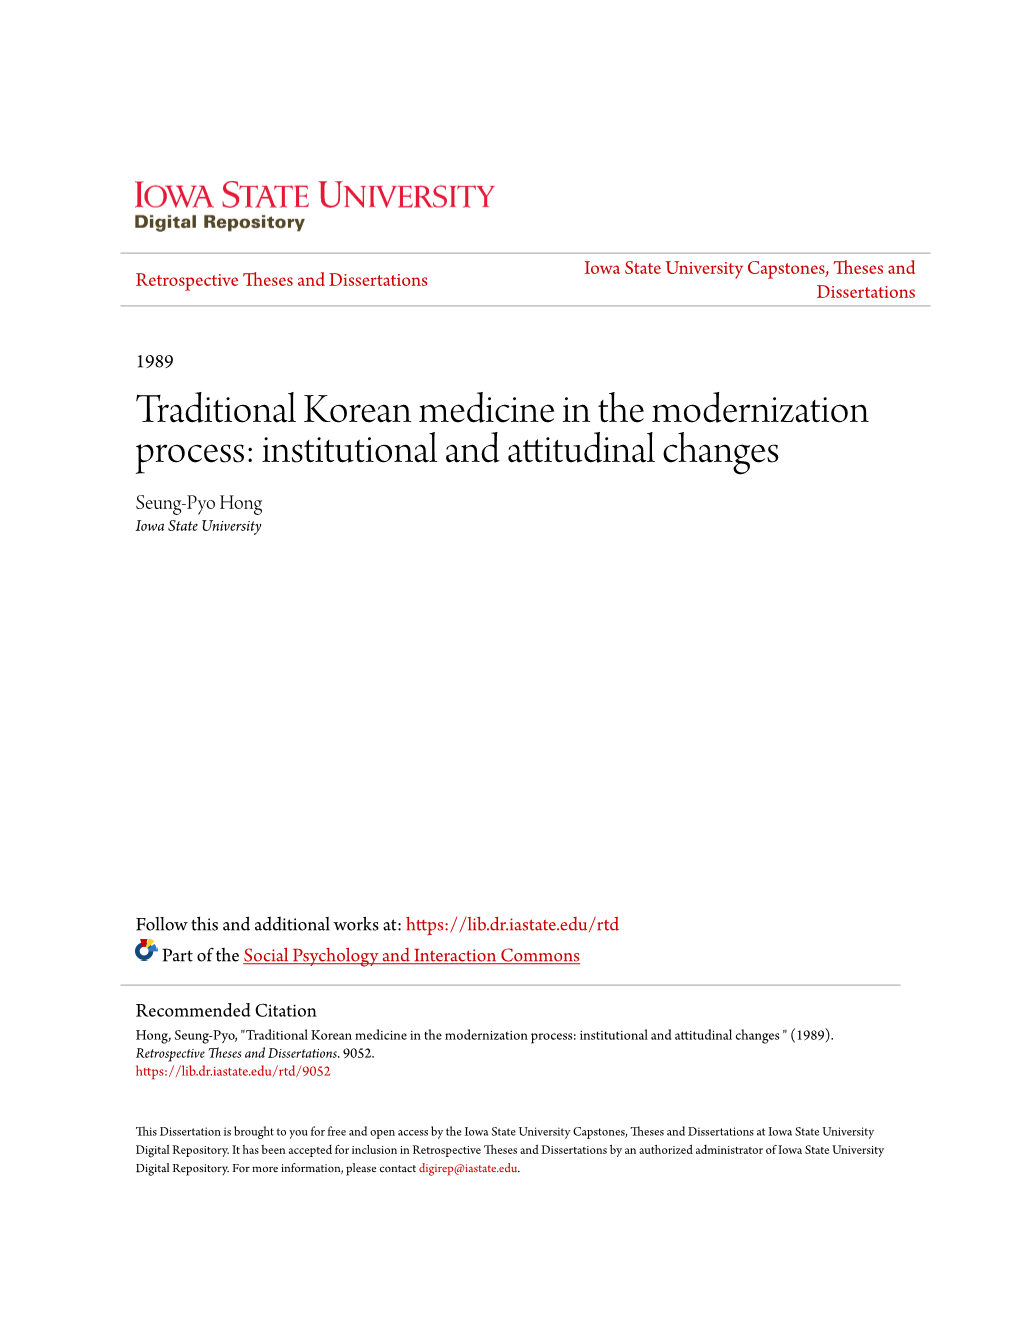 Traditional Korean Medicine in the Modernization Process: Institutional and Attitudinal Changes Seung-Pyo Hong Iowa State University